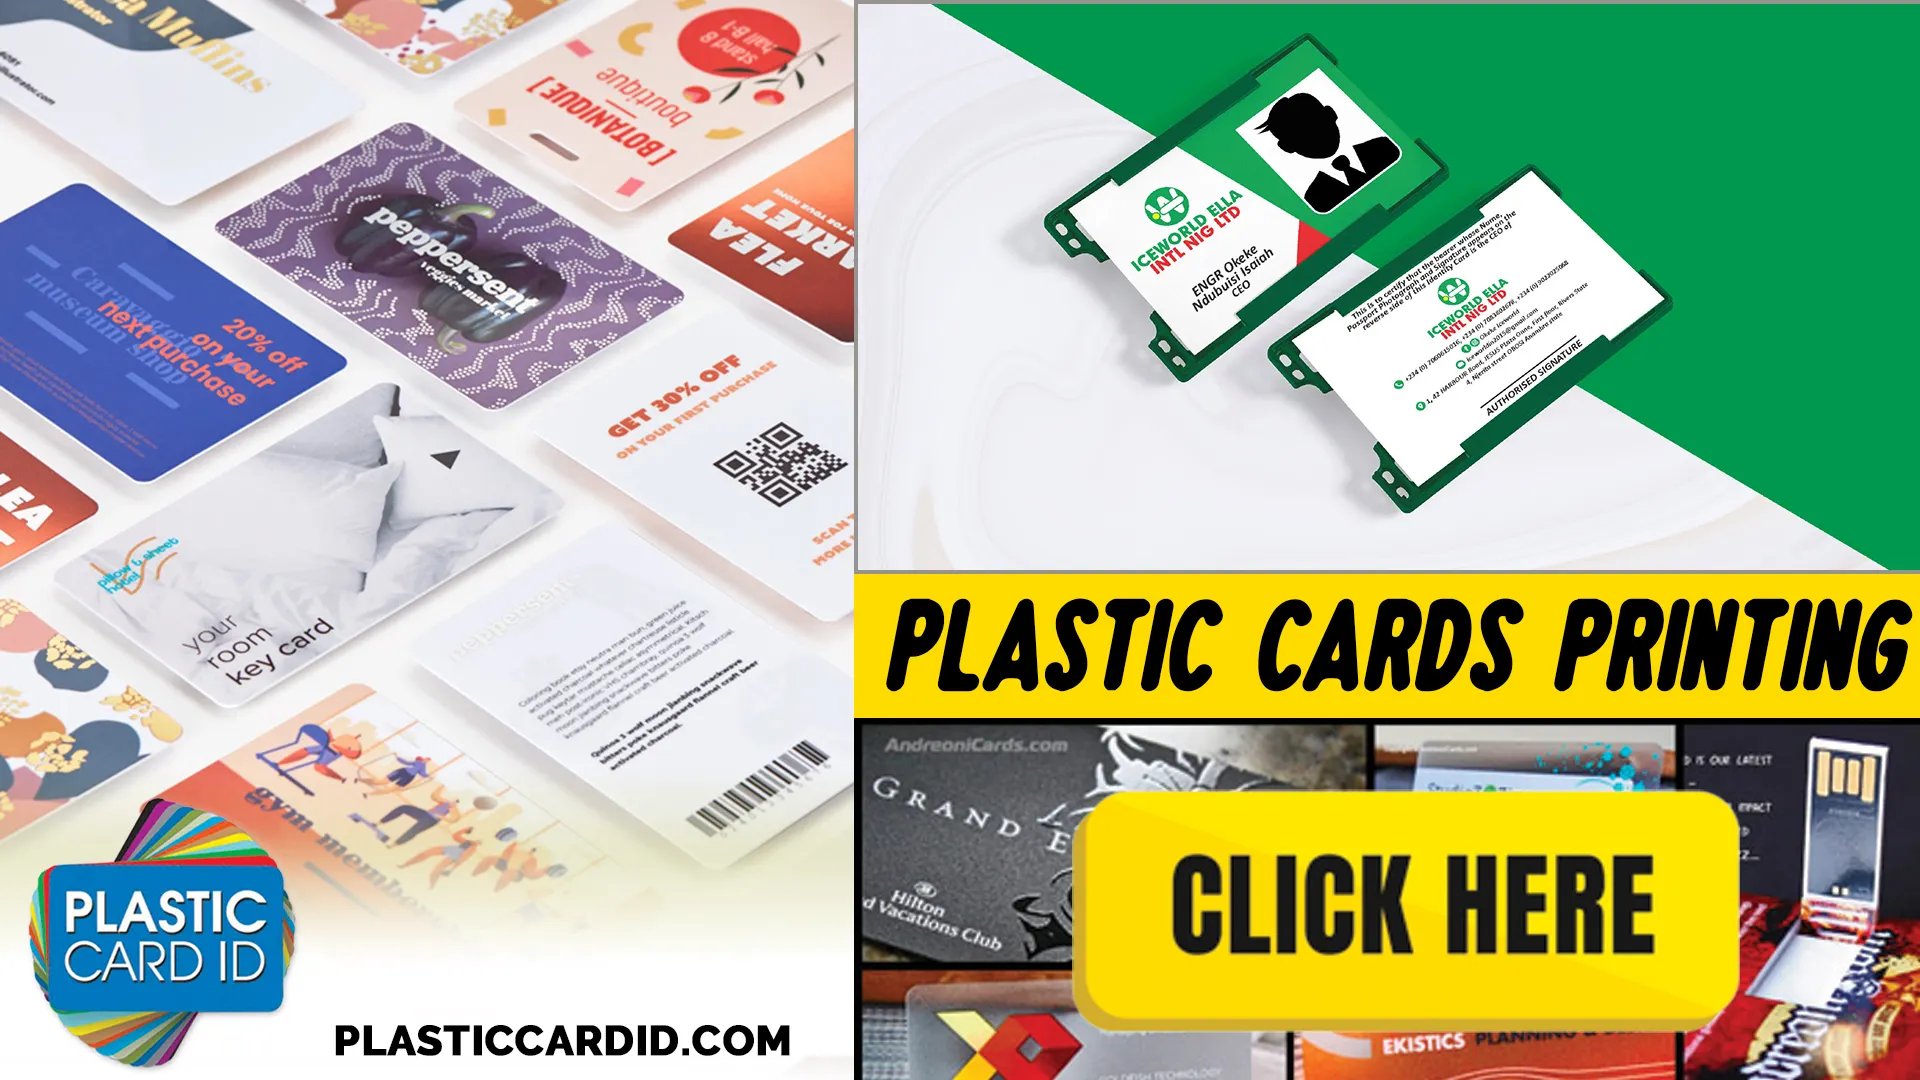 Your Design Dreams Realized with Plastic Card ID




